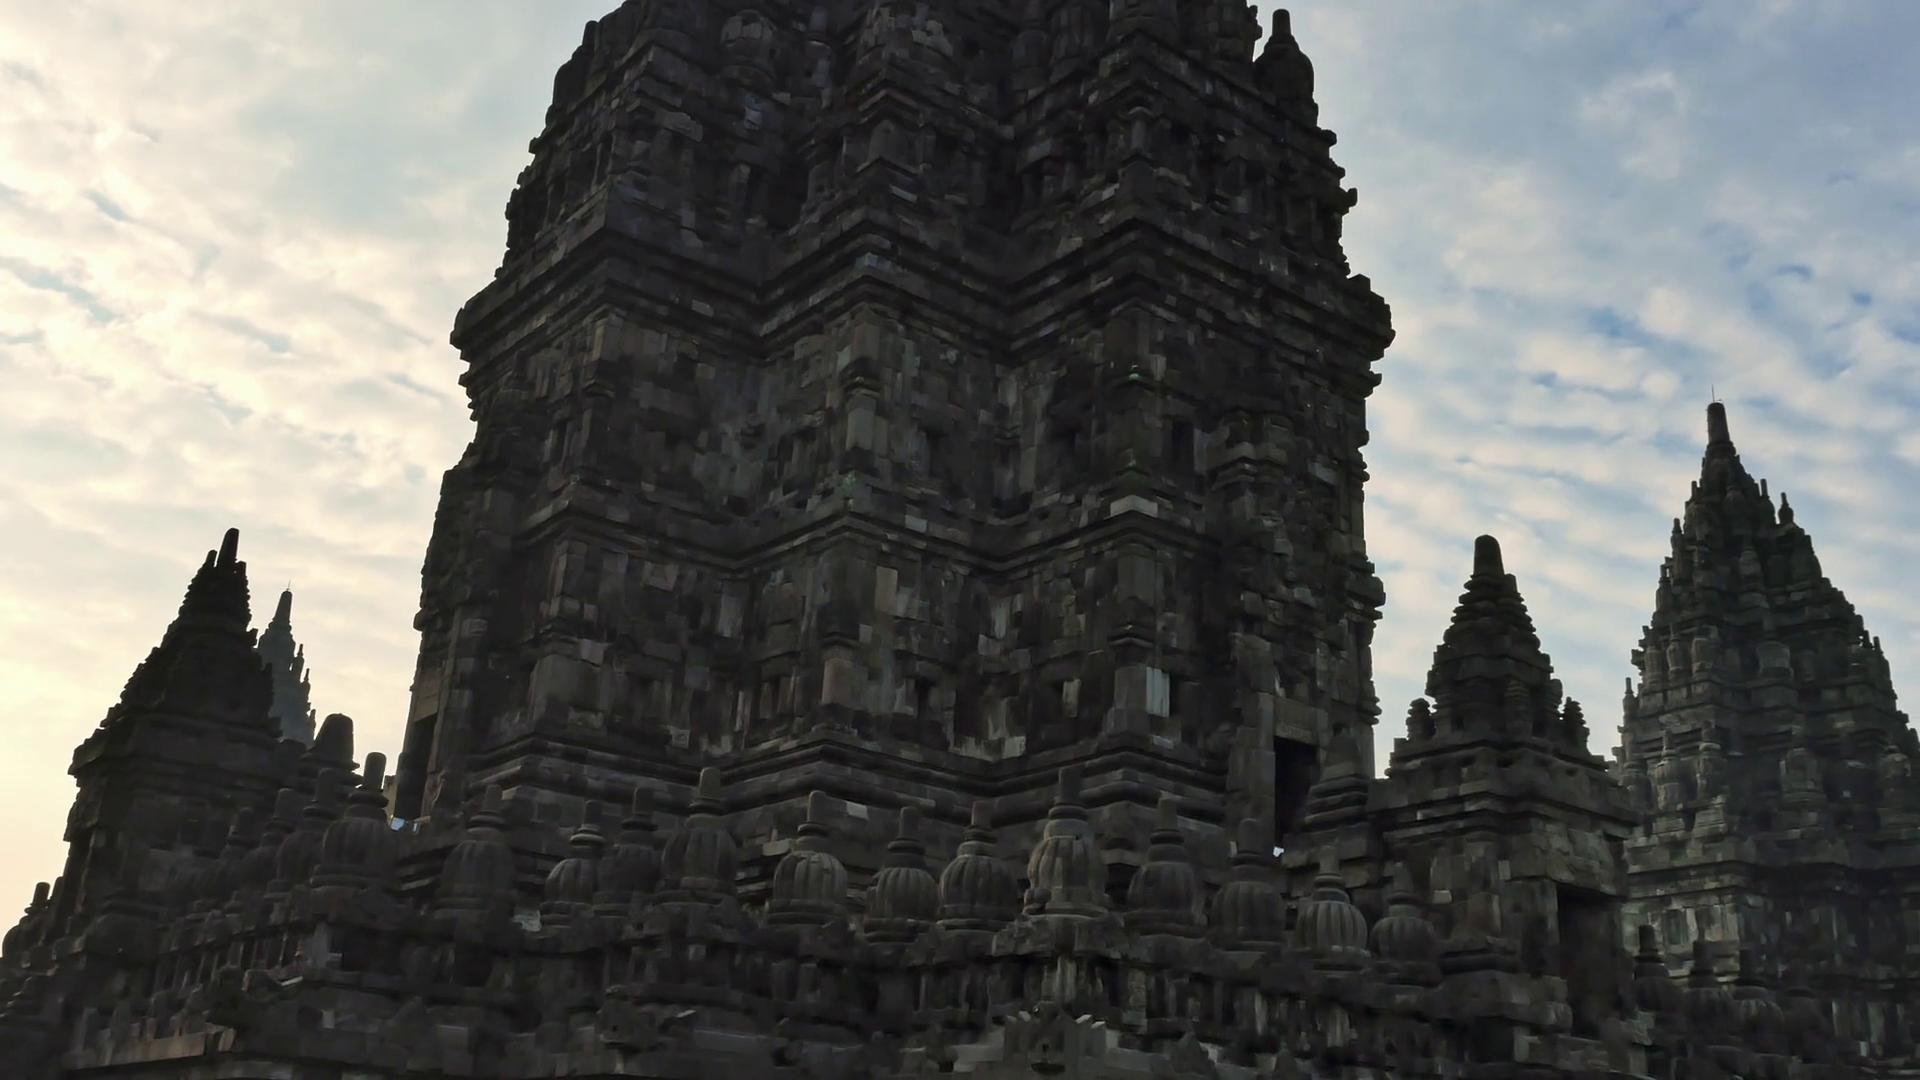 Stone carving, reliefs and architecture details of Prambanan ancient ...